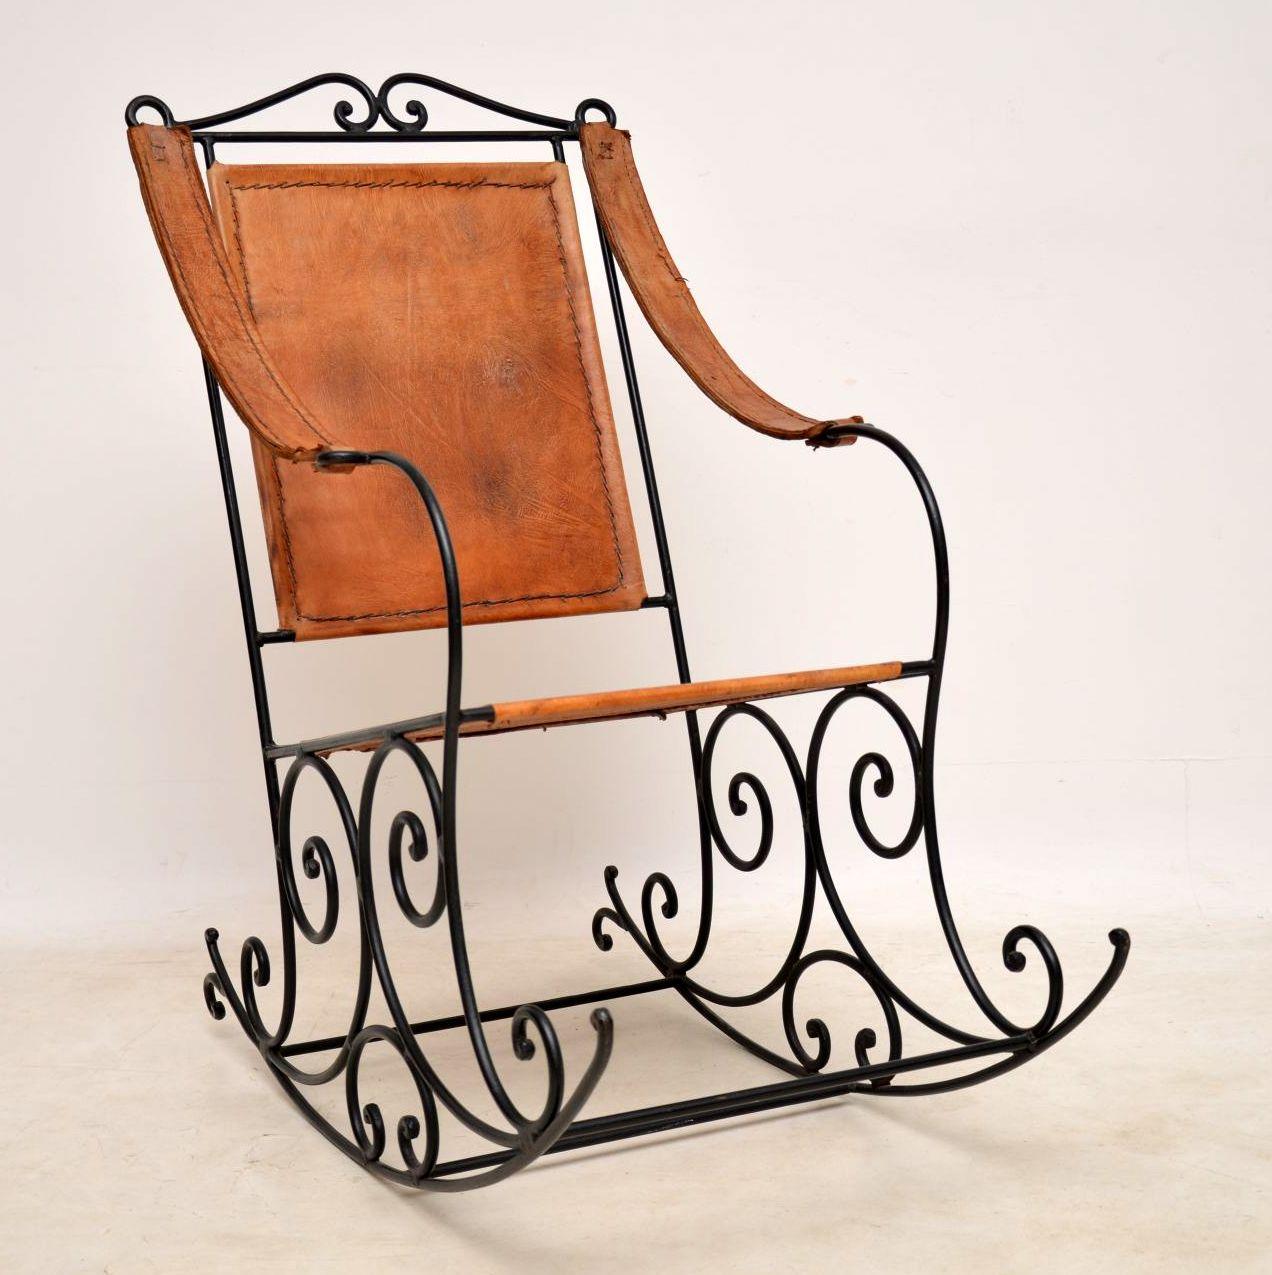 Very quirky wrought iron rocking chair upholstered in distressed brown leather. The wrought iron frame has a beautiful design and the distressed leather complements it very well. The leather itself is in good condition and is naturally aged. It